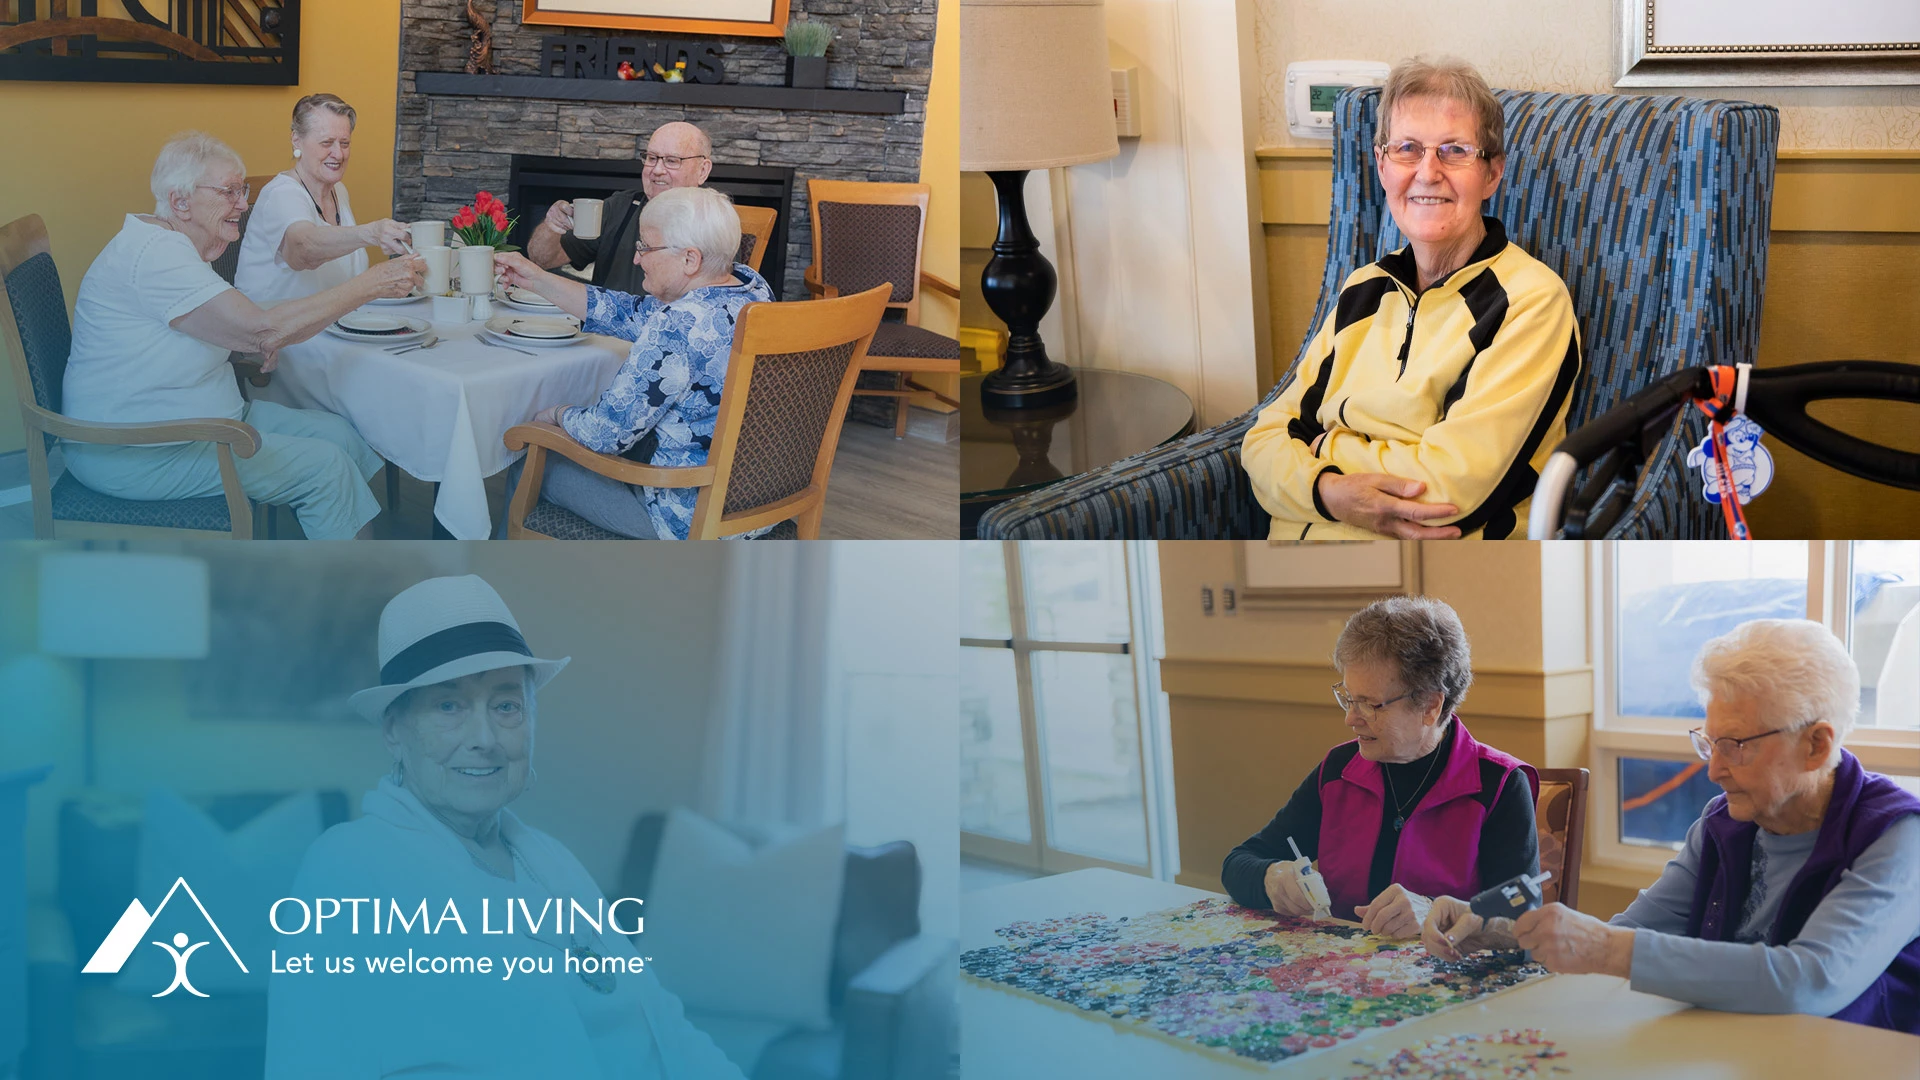 Four image collage of senior residents from various residences